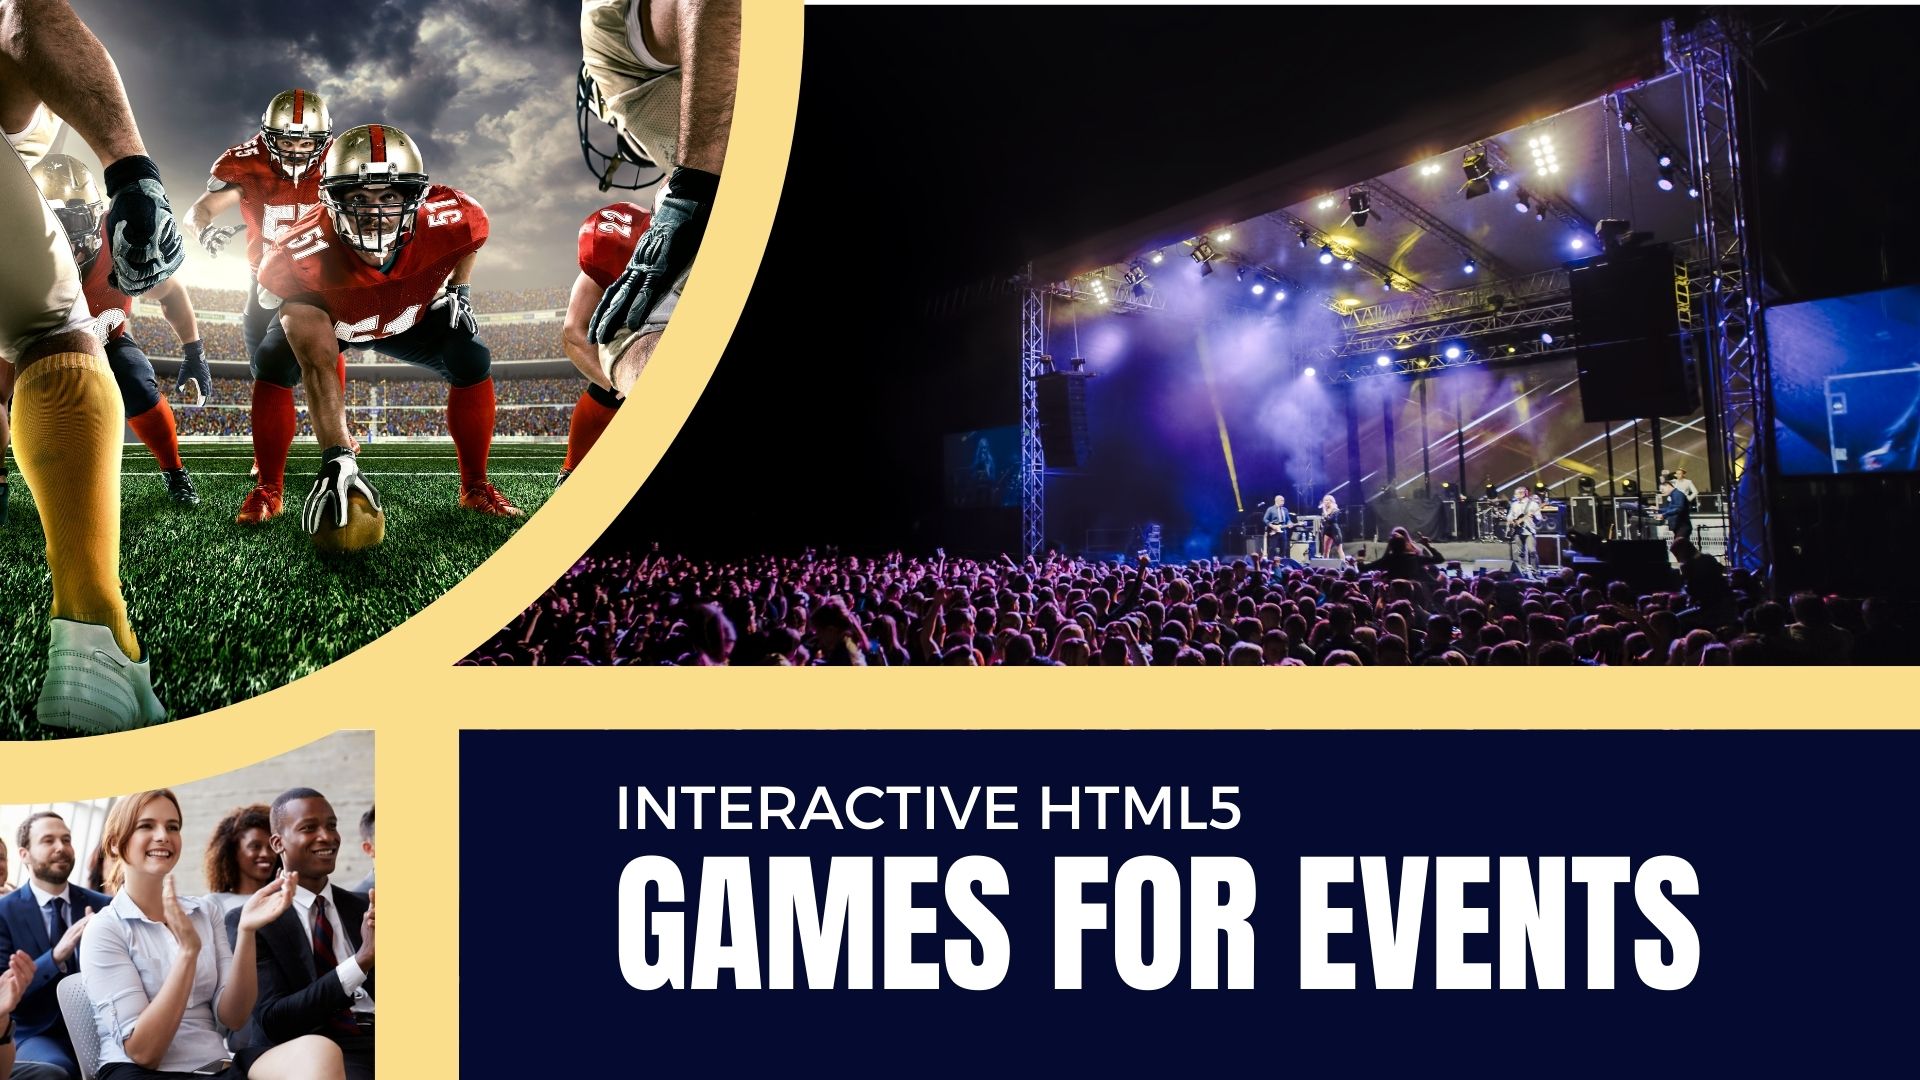 Interactive HTML5 Games for Events